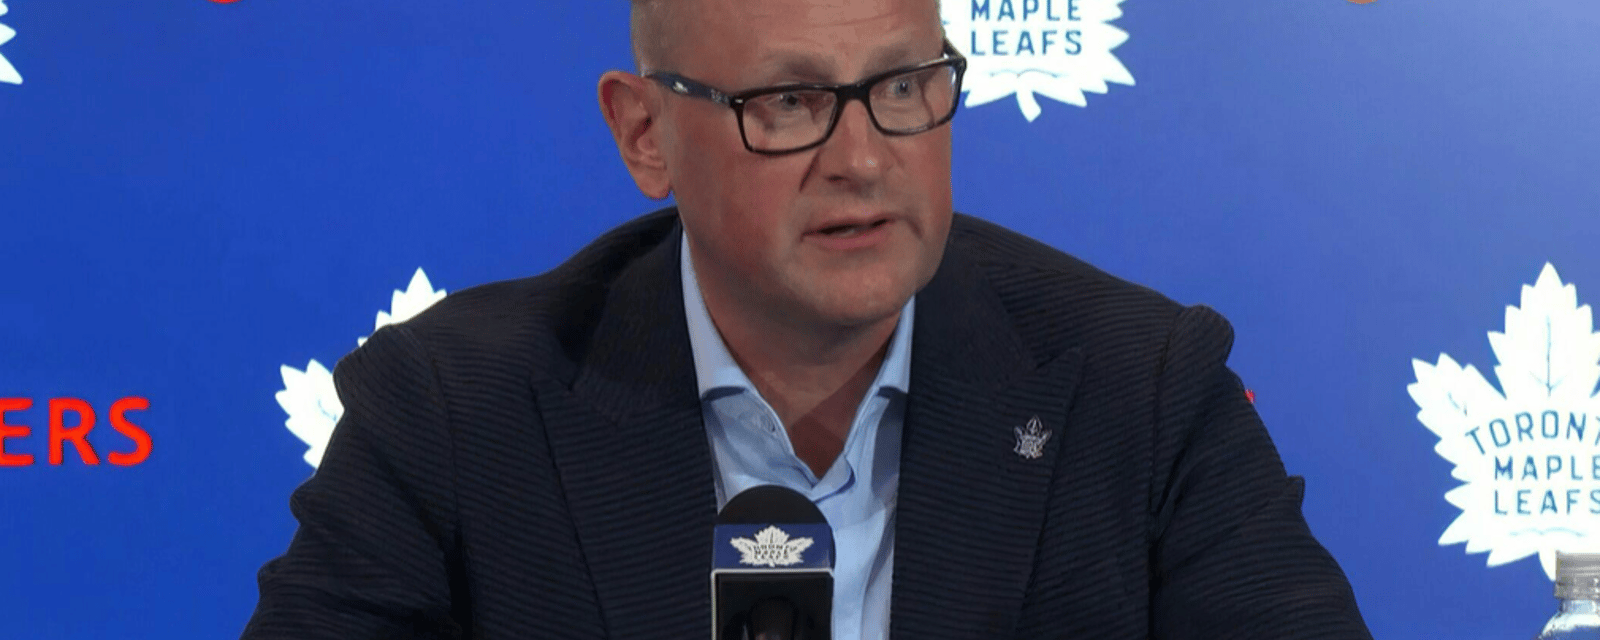 Maple Leafs announce new contract extension 